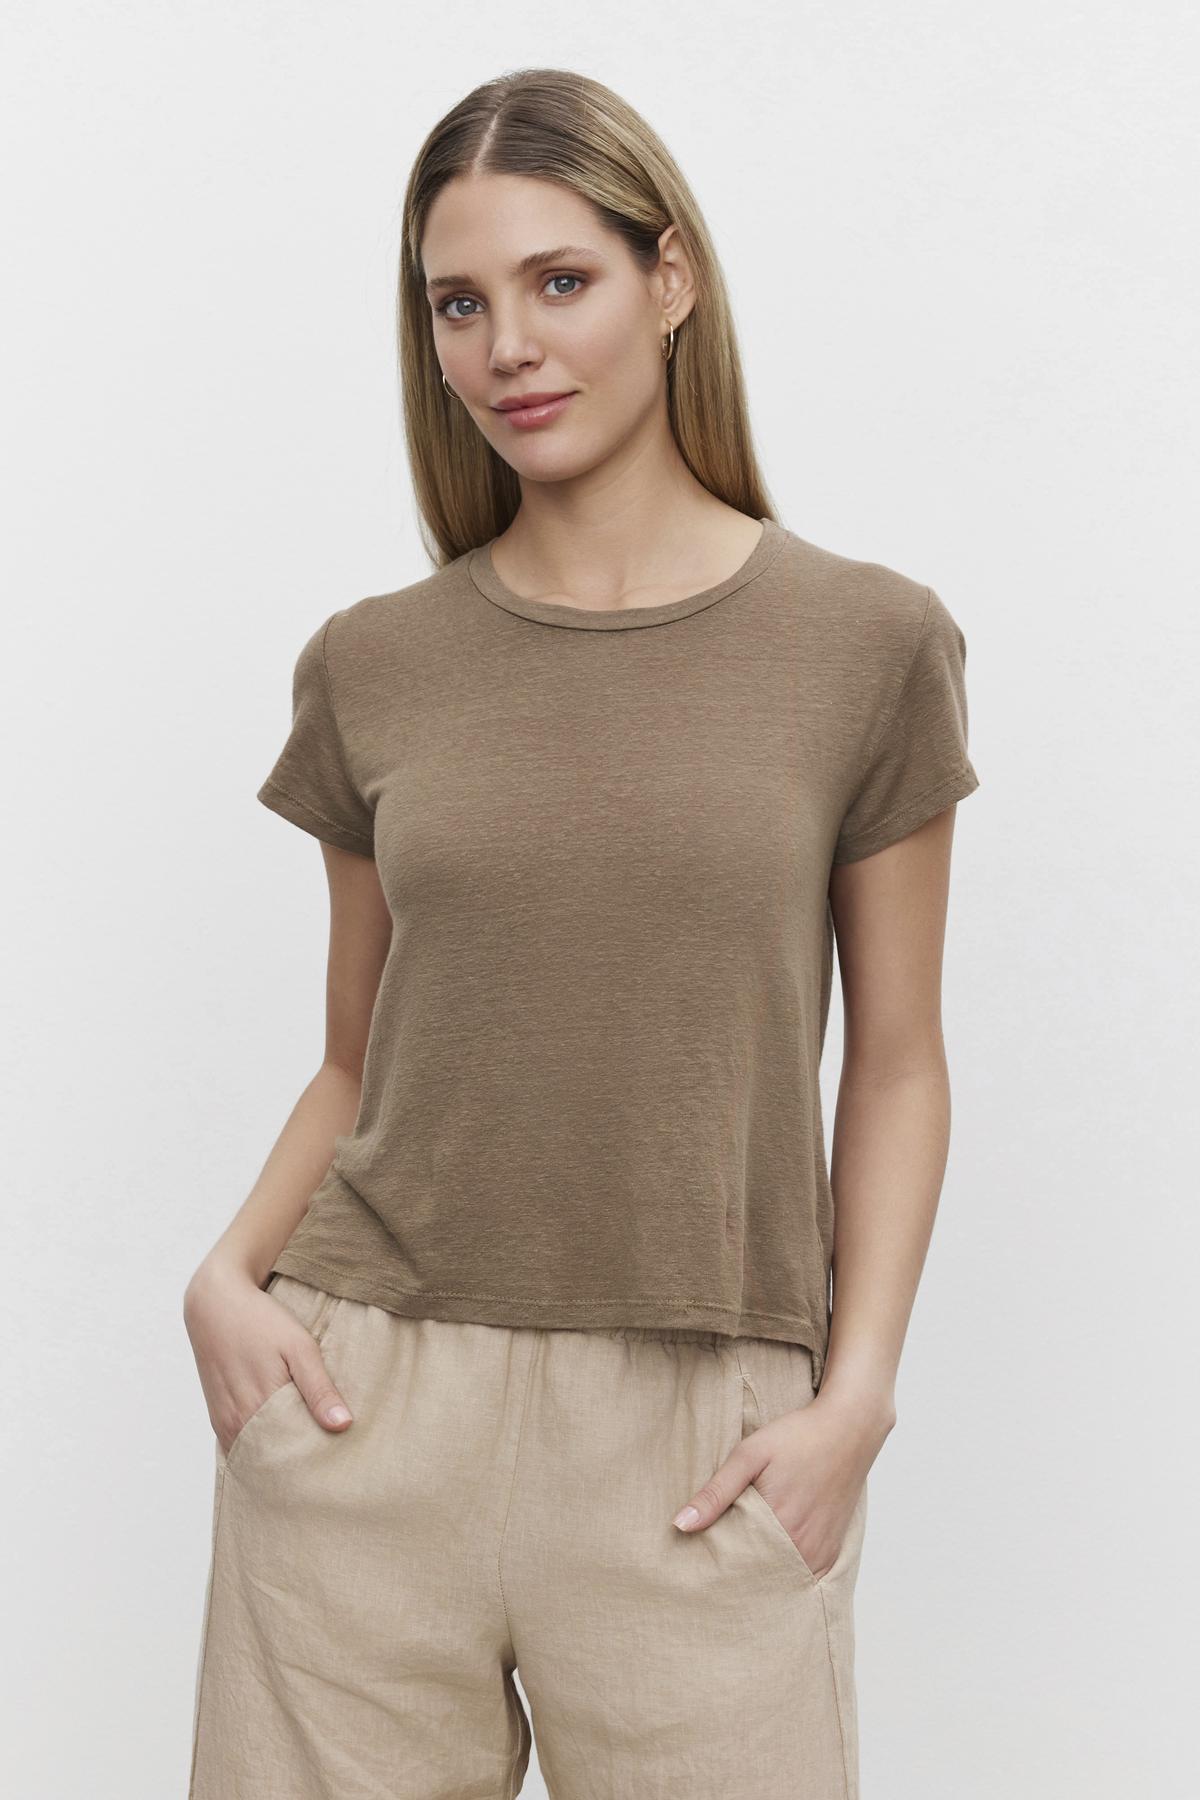   Woman wearing a Velvet by Graham & Spencer CASEY LINEN KNIT CREW NECK TEE and beige pants standing against a white background. 